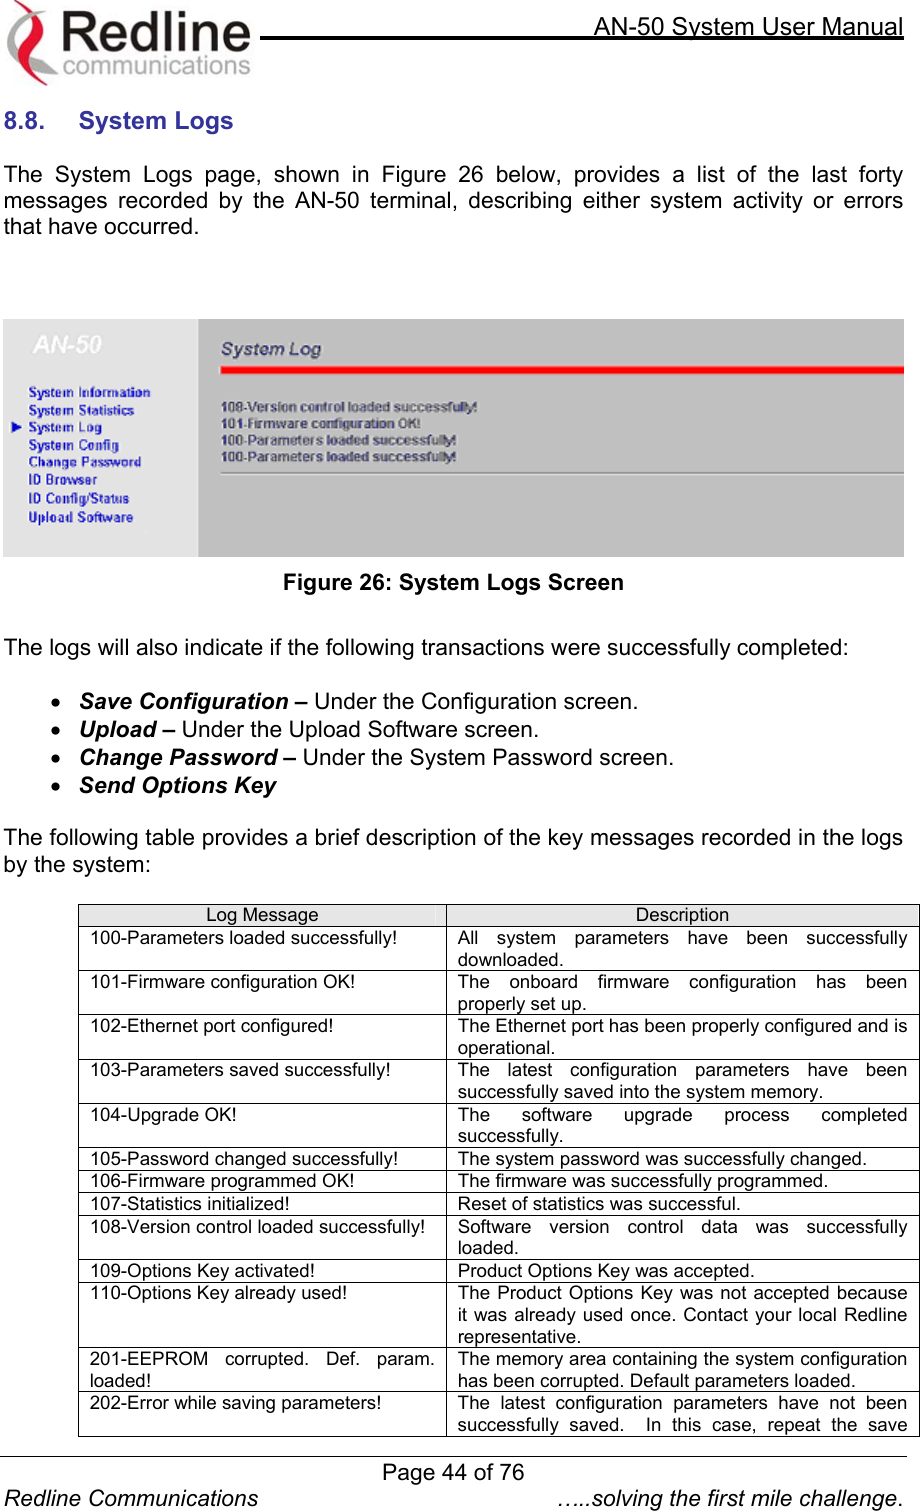     AN-50 System User Manual  Redline Communications  …..solving the first mile challenge. 8.8. System Logs  The System Logs page, shown in Figure 26 below, provides a list of the last forty messages recorded by the AN-50 terminal, describing either system activity or errors that have occurred.      Figure 26: System Logs Screen  The logs will also indicate if the following transactions were successfully completed:  •  Save Configuration – Under the Configuration screen. •  Upload – Under the Upload Software screen. •  Change Password – Under the System Password screen. •  Send Options Key  The following table provides a brief description of the key messages recorded in the logs by the system:  Log Message  Description 100-Parameters loaded successfully!  All system parameters have been successfully downloaded. 101-Firmware configuration OK!  The  onboard firmware configuration has been properly set up. 102-Ethernet port configured!  The Ethernet port has been properly configured and is operational. 103-Parameters saved successfully!  The latest configuration parameters have been successfully saved into the system memory. 104-Upgrade OK!  The software upgrade process completed successfully. 105-Password changed successfully!    The system password was successfully changed. 106-Firmware programmed OK!  The firmware was successfully programmed. 107-Statistics initialized!  Reset of statistics was successful. 108-Version control loaded successfully!  Software  version  control  data  was  successfully loaded. 109-Options Key activated!  Product Options Key was accepted. 110-Options Key already used!  The Product Options Key was not accepted because it was already used once. Contact your local Redline representative. 201-EEPROM corrupted. Def. param. loaded! The memory area containing the system configuration has been corrupted. Default parameters loaded.  202-Error while saving parameters!  The  latest configuration parameters have not been successfully saved.  In this case, repeat the save Page 44 of 76